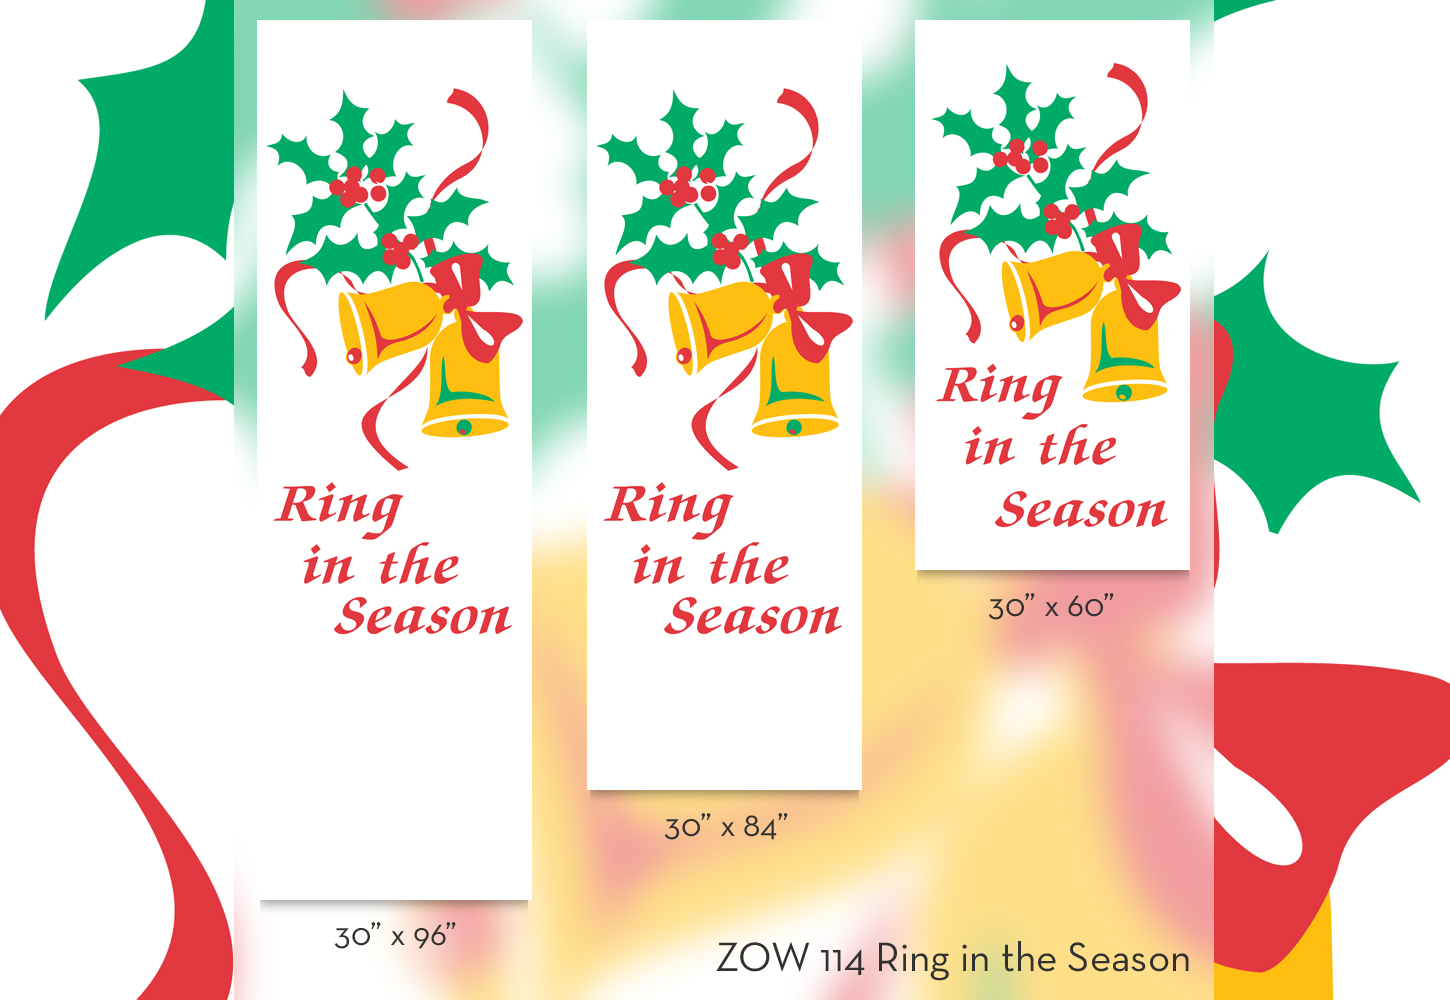 ZOW 114 Ring in the Season